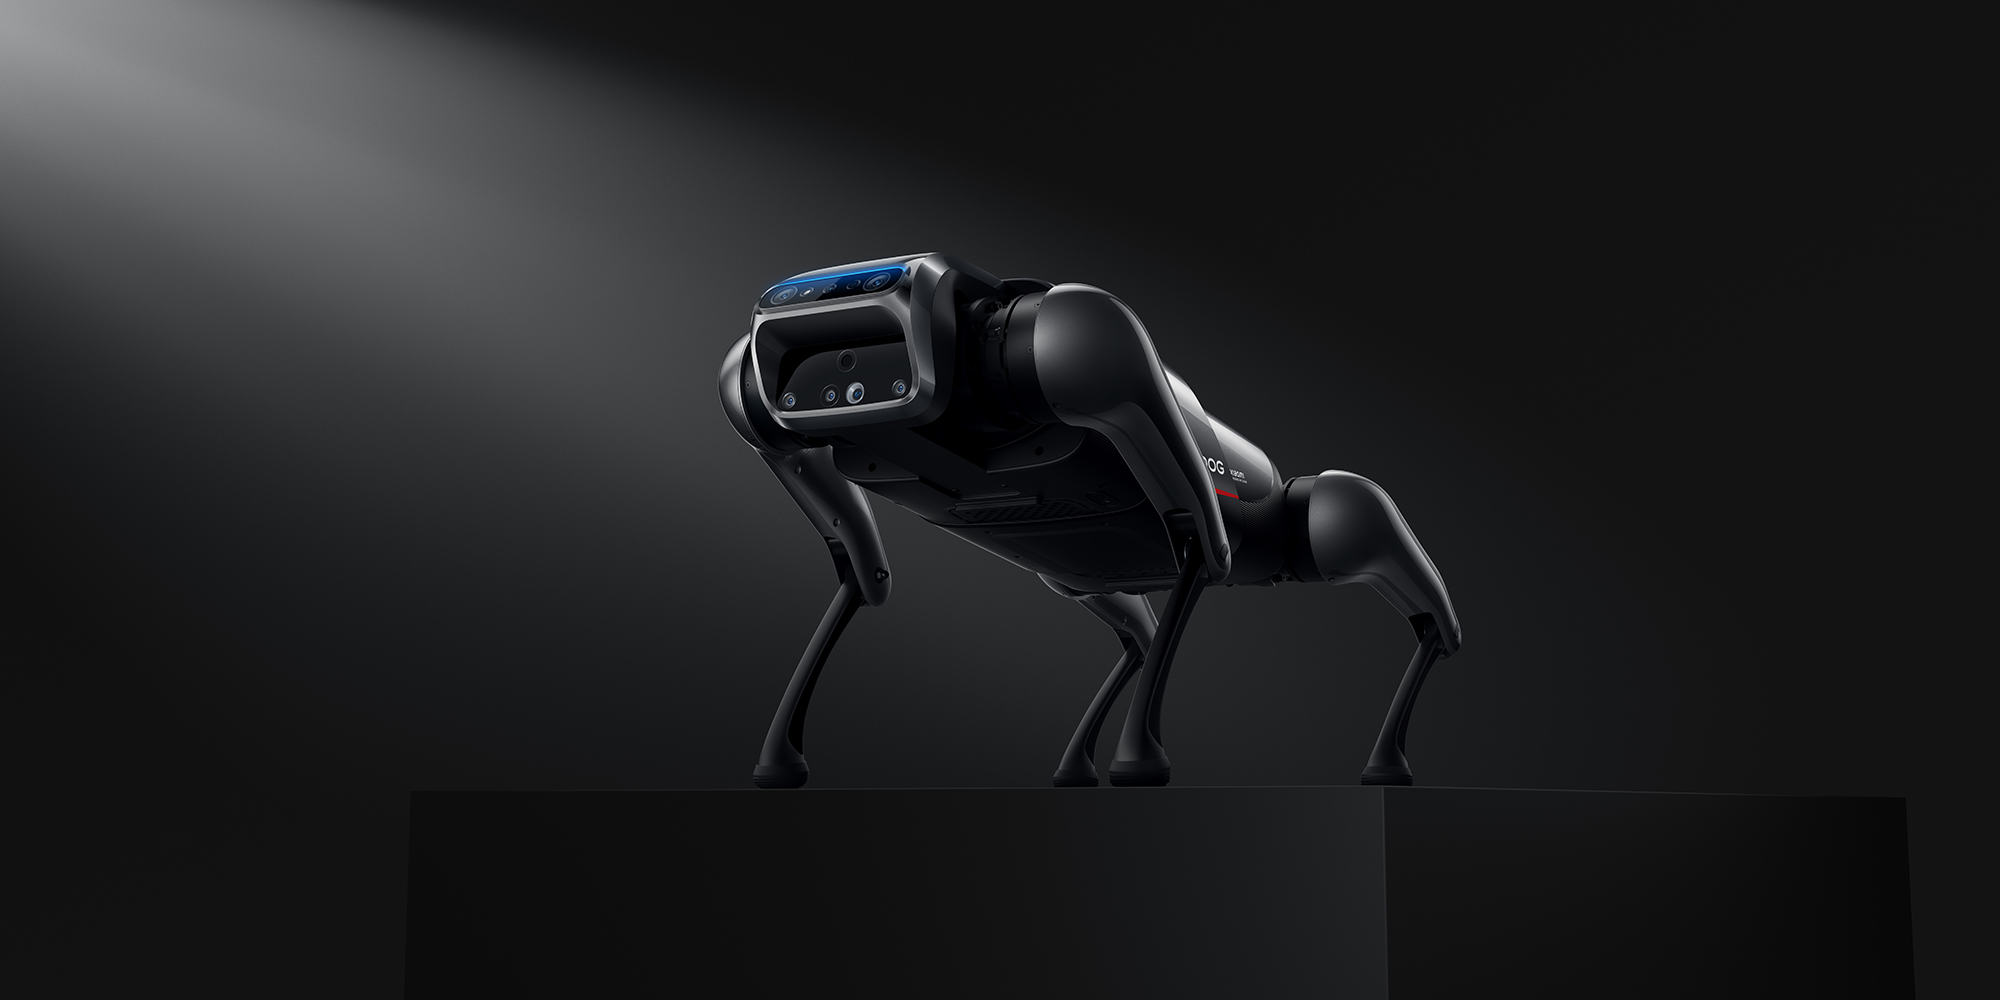 Xiaomi unveiled its first robot dog CyberDog: this experimental open-source robot is not for everyone